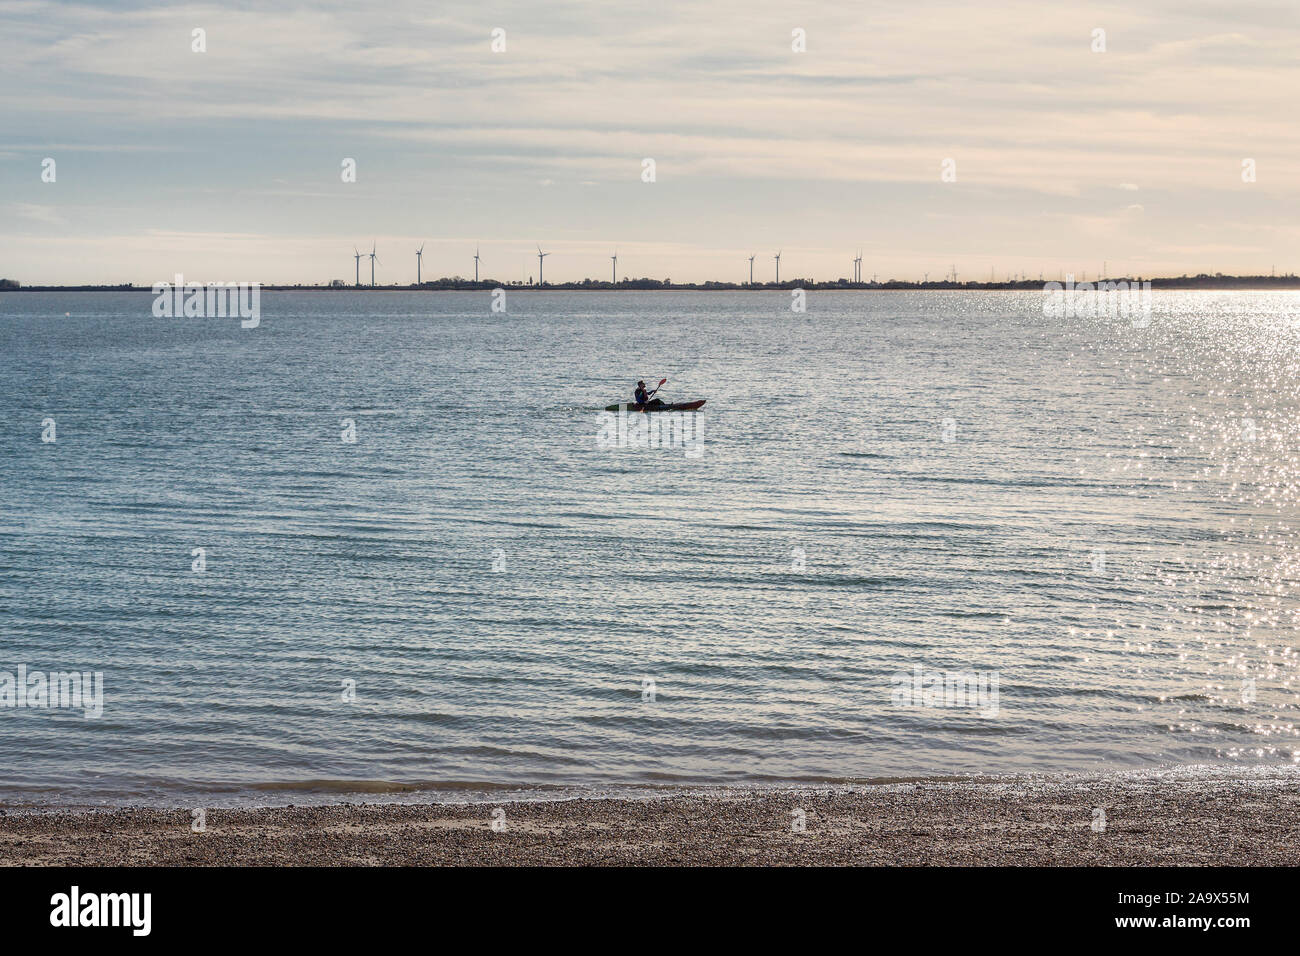 A kayaker paddles through the sea, behind him wind turbines can be seen. Possibly suggesting sustainable energy awareness and environmentalism. Stock Photo